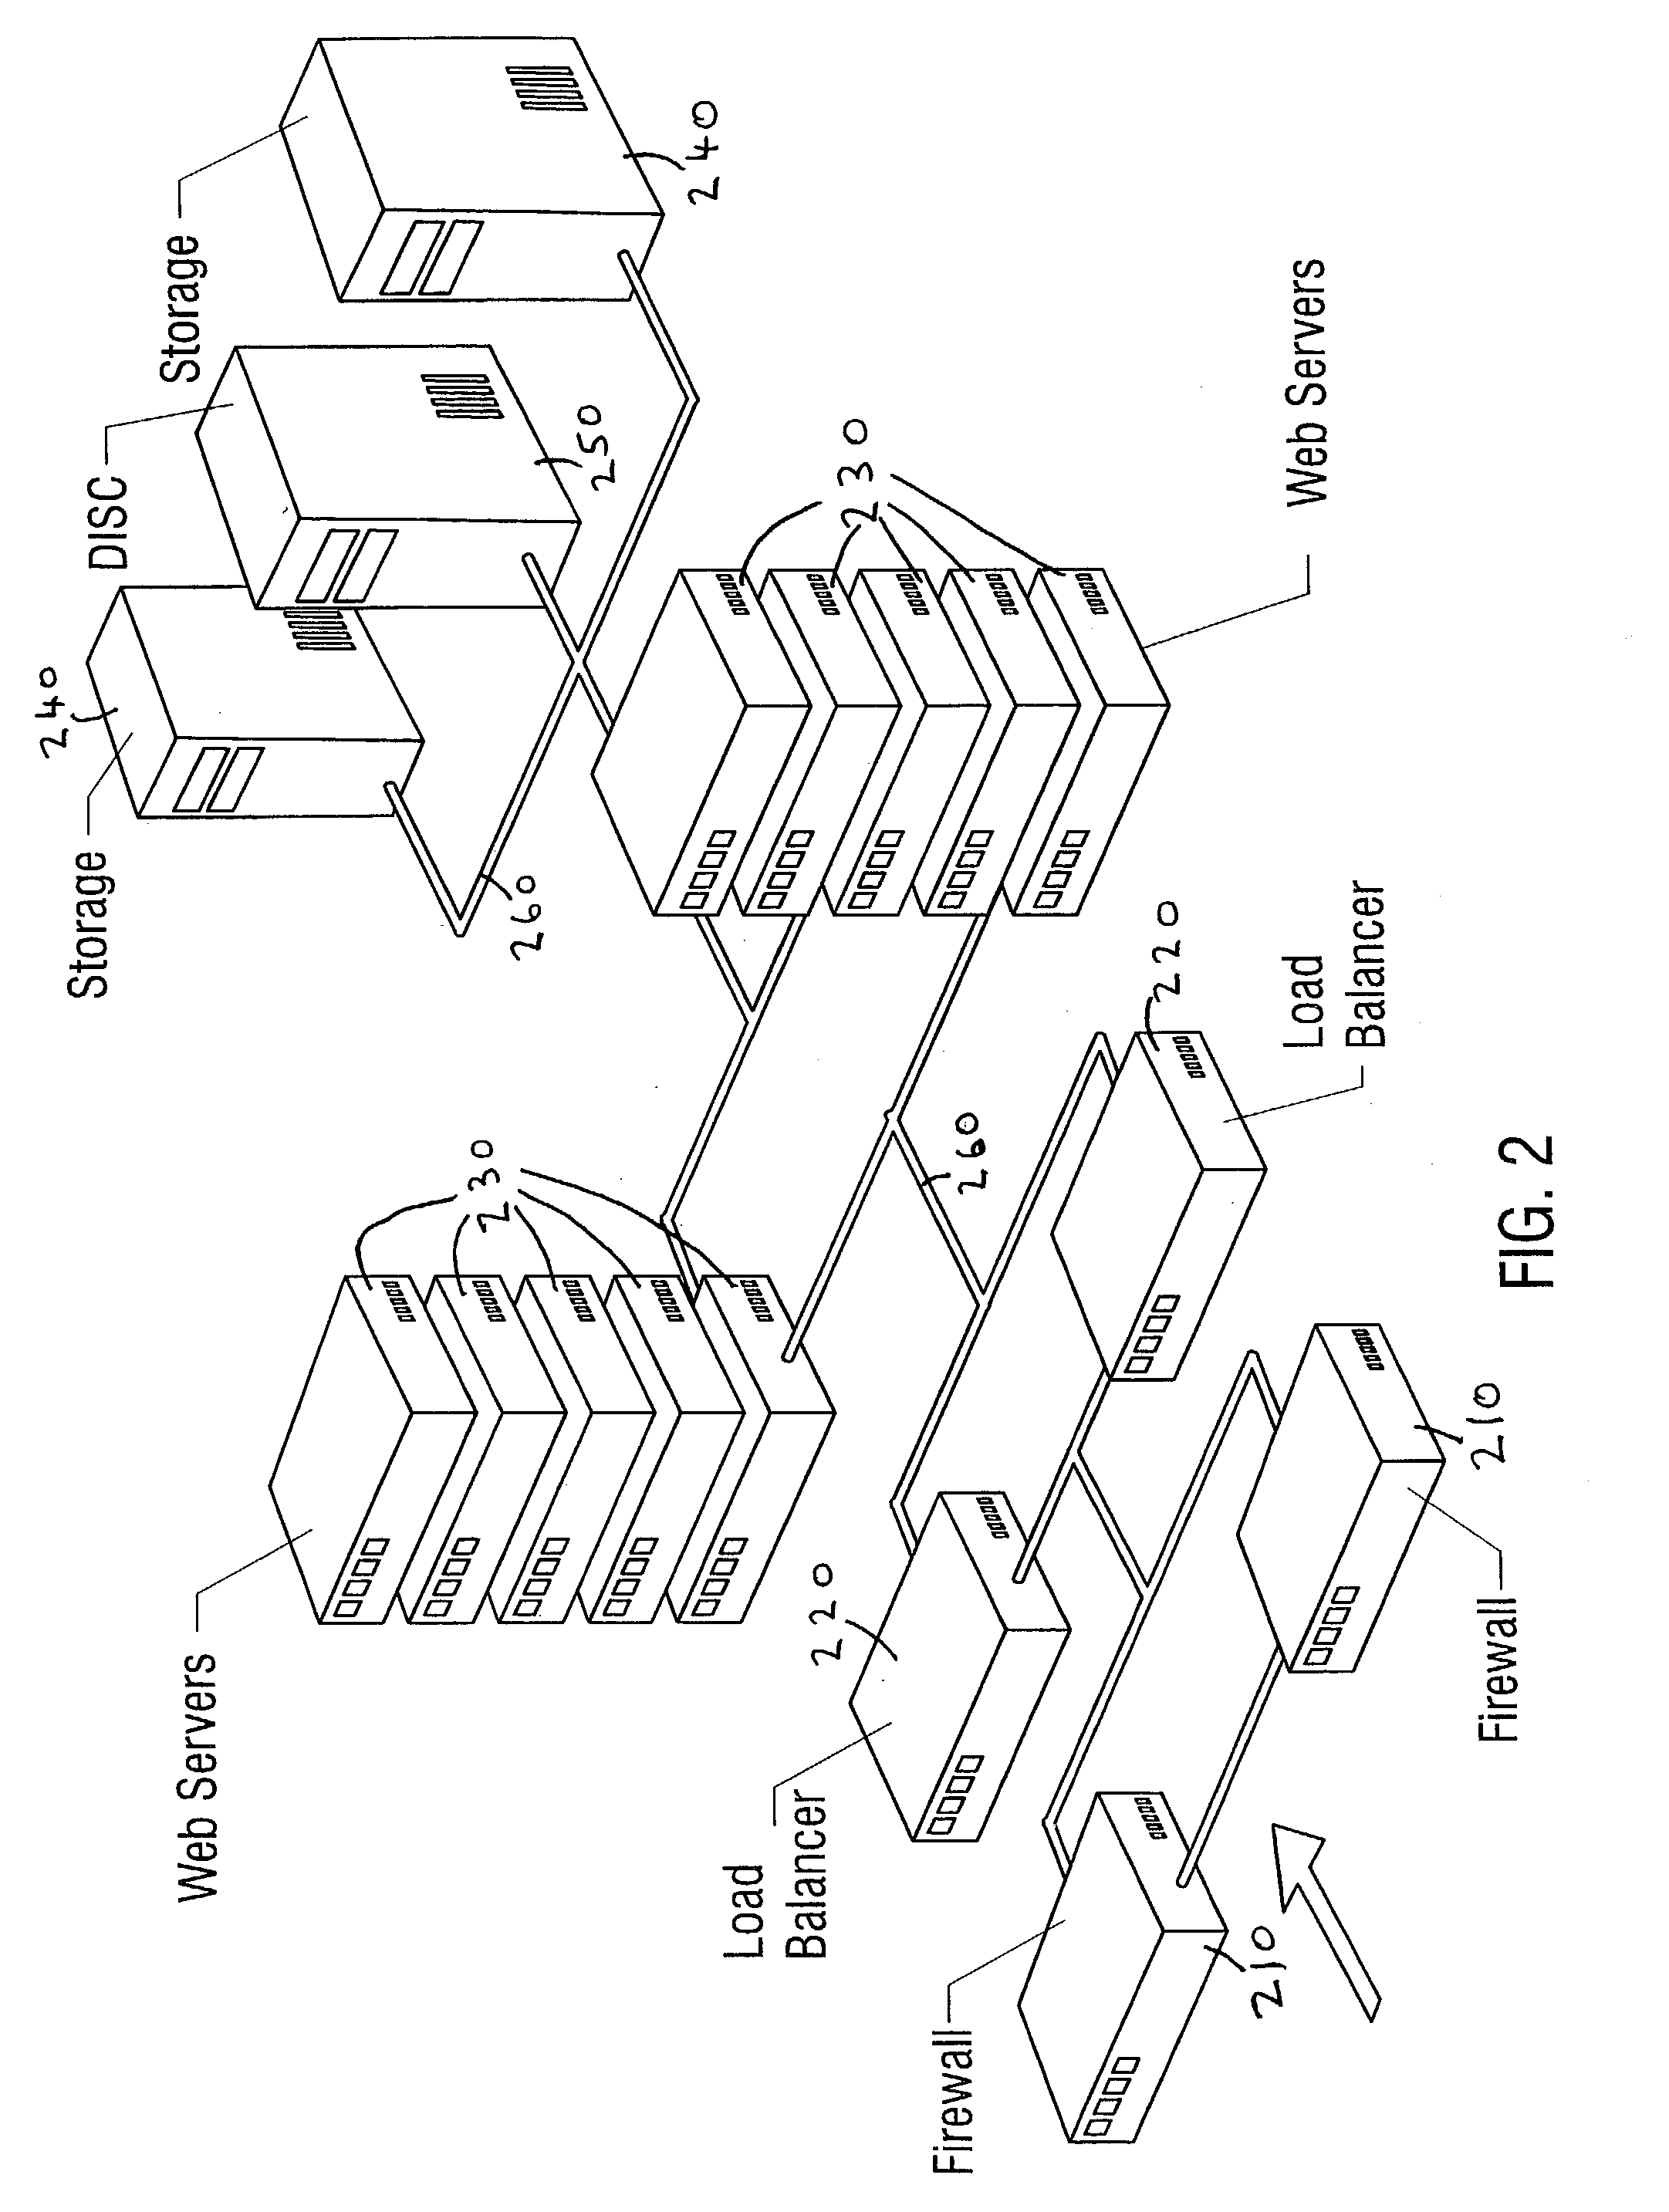 System and method for high performance shared web hosting